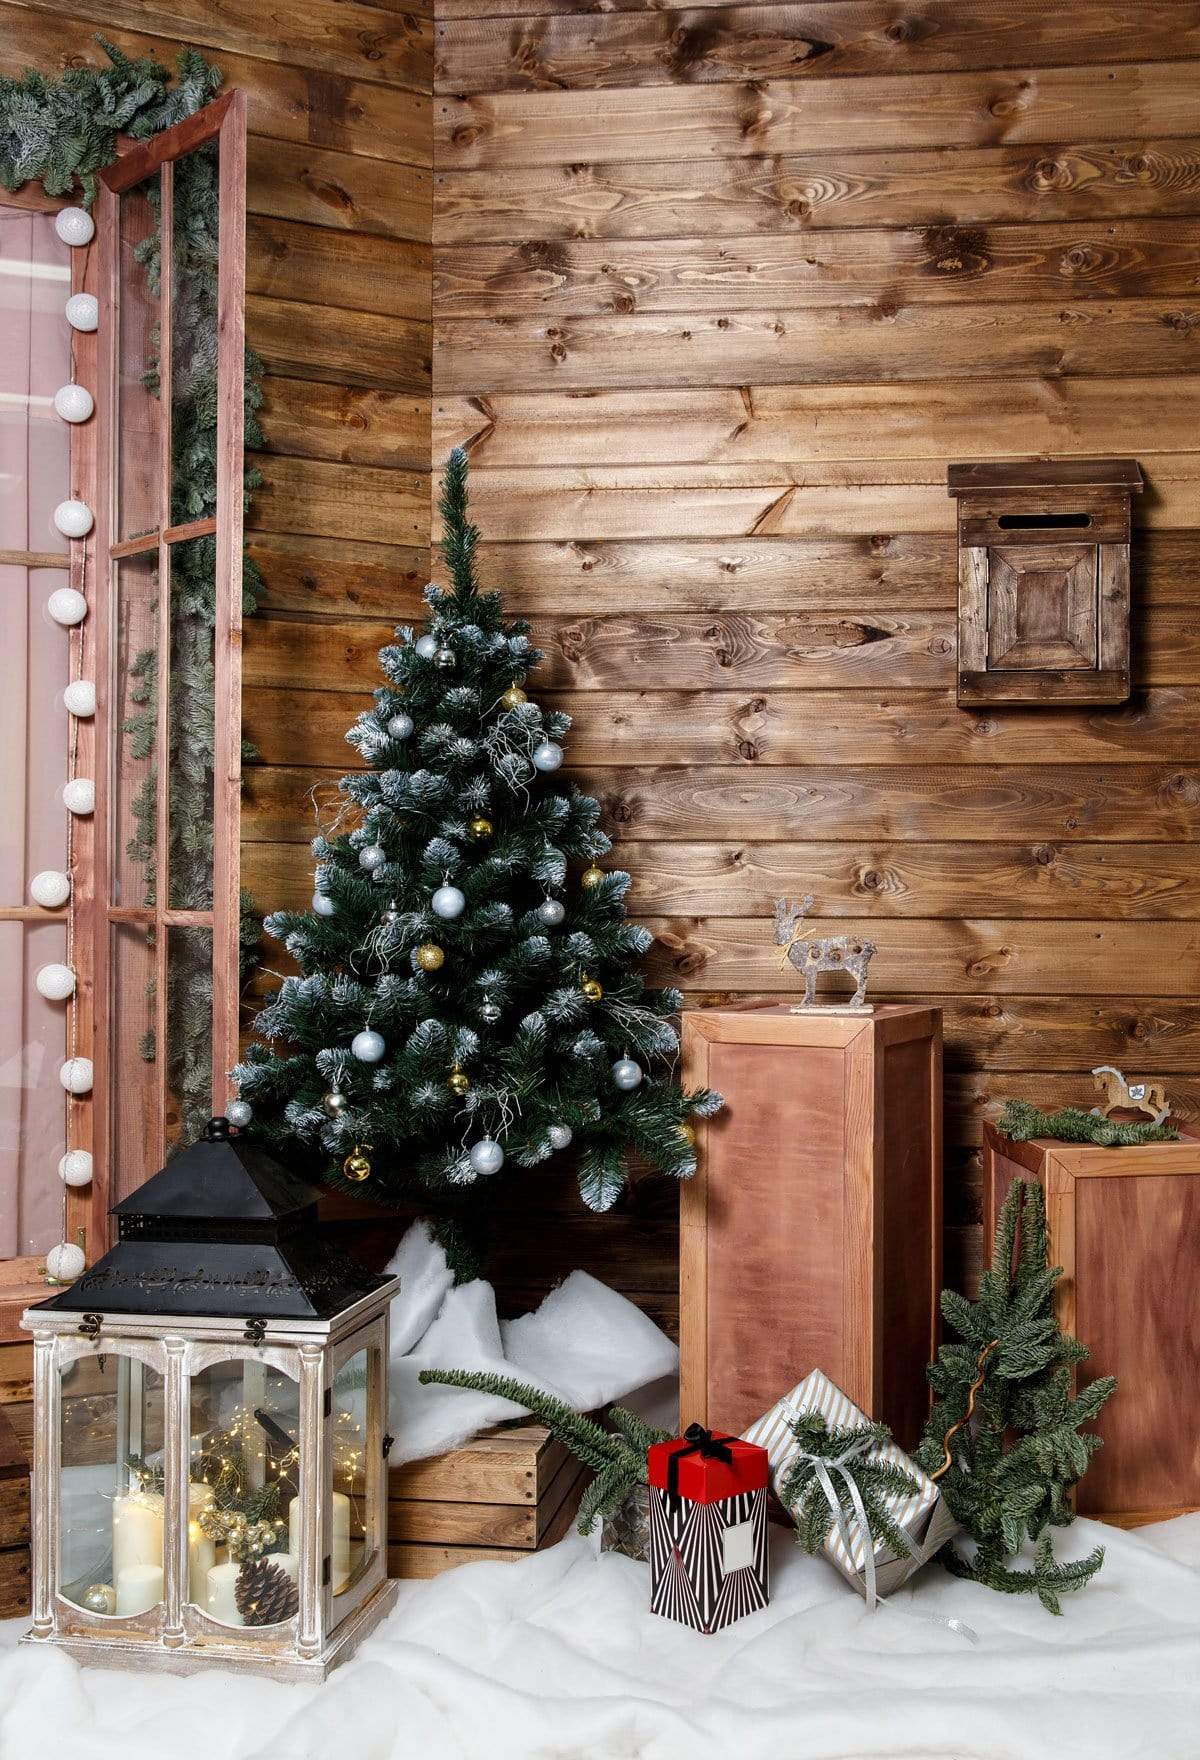 Katebackdrop£ºKate Wood Wall And Christmas Tree With Decorations for Photography